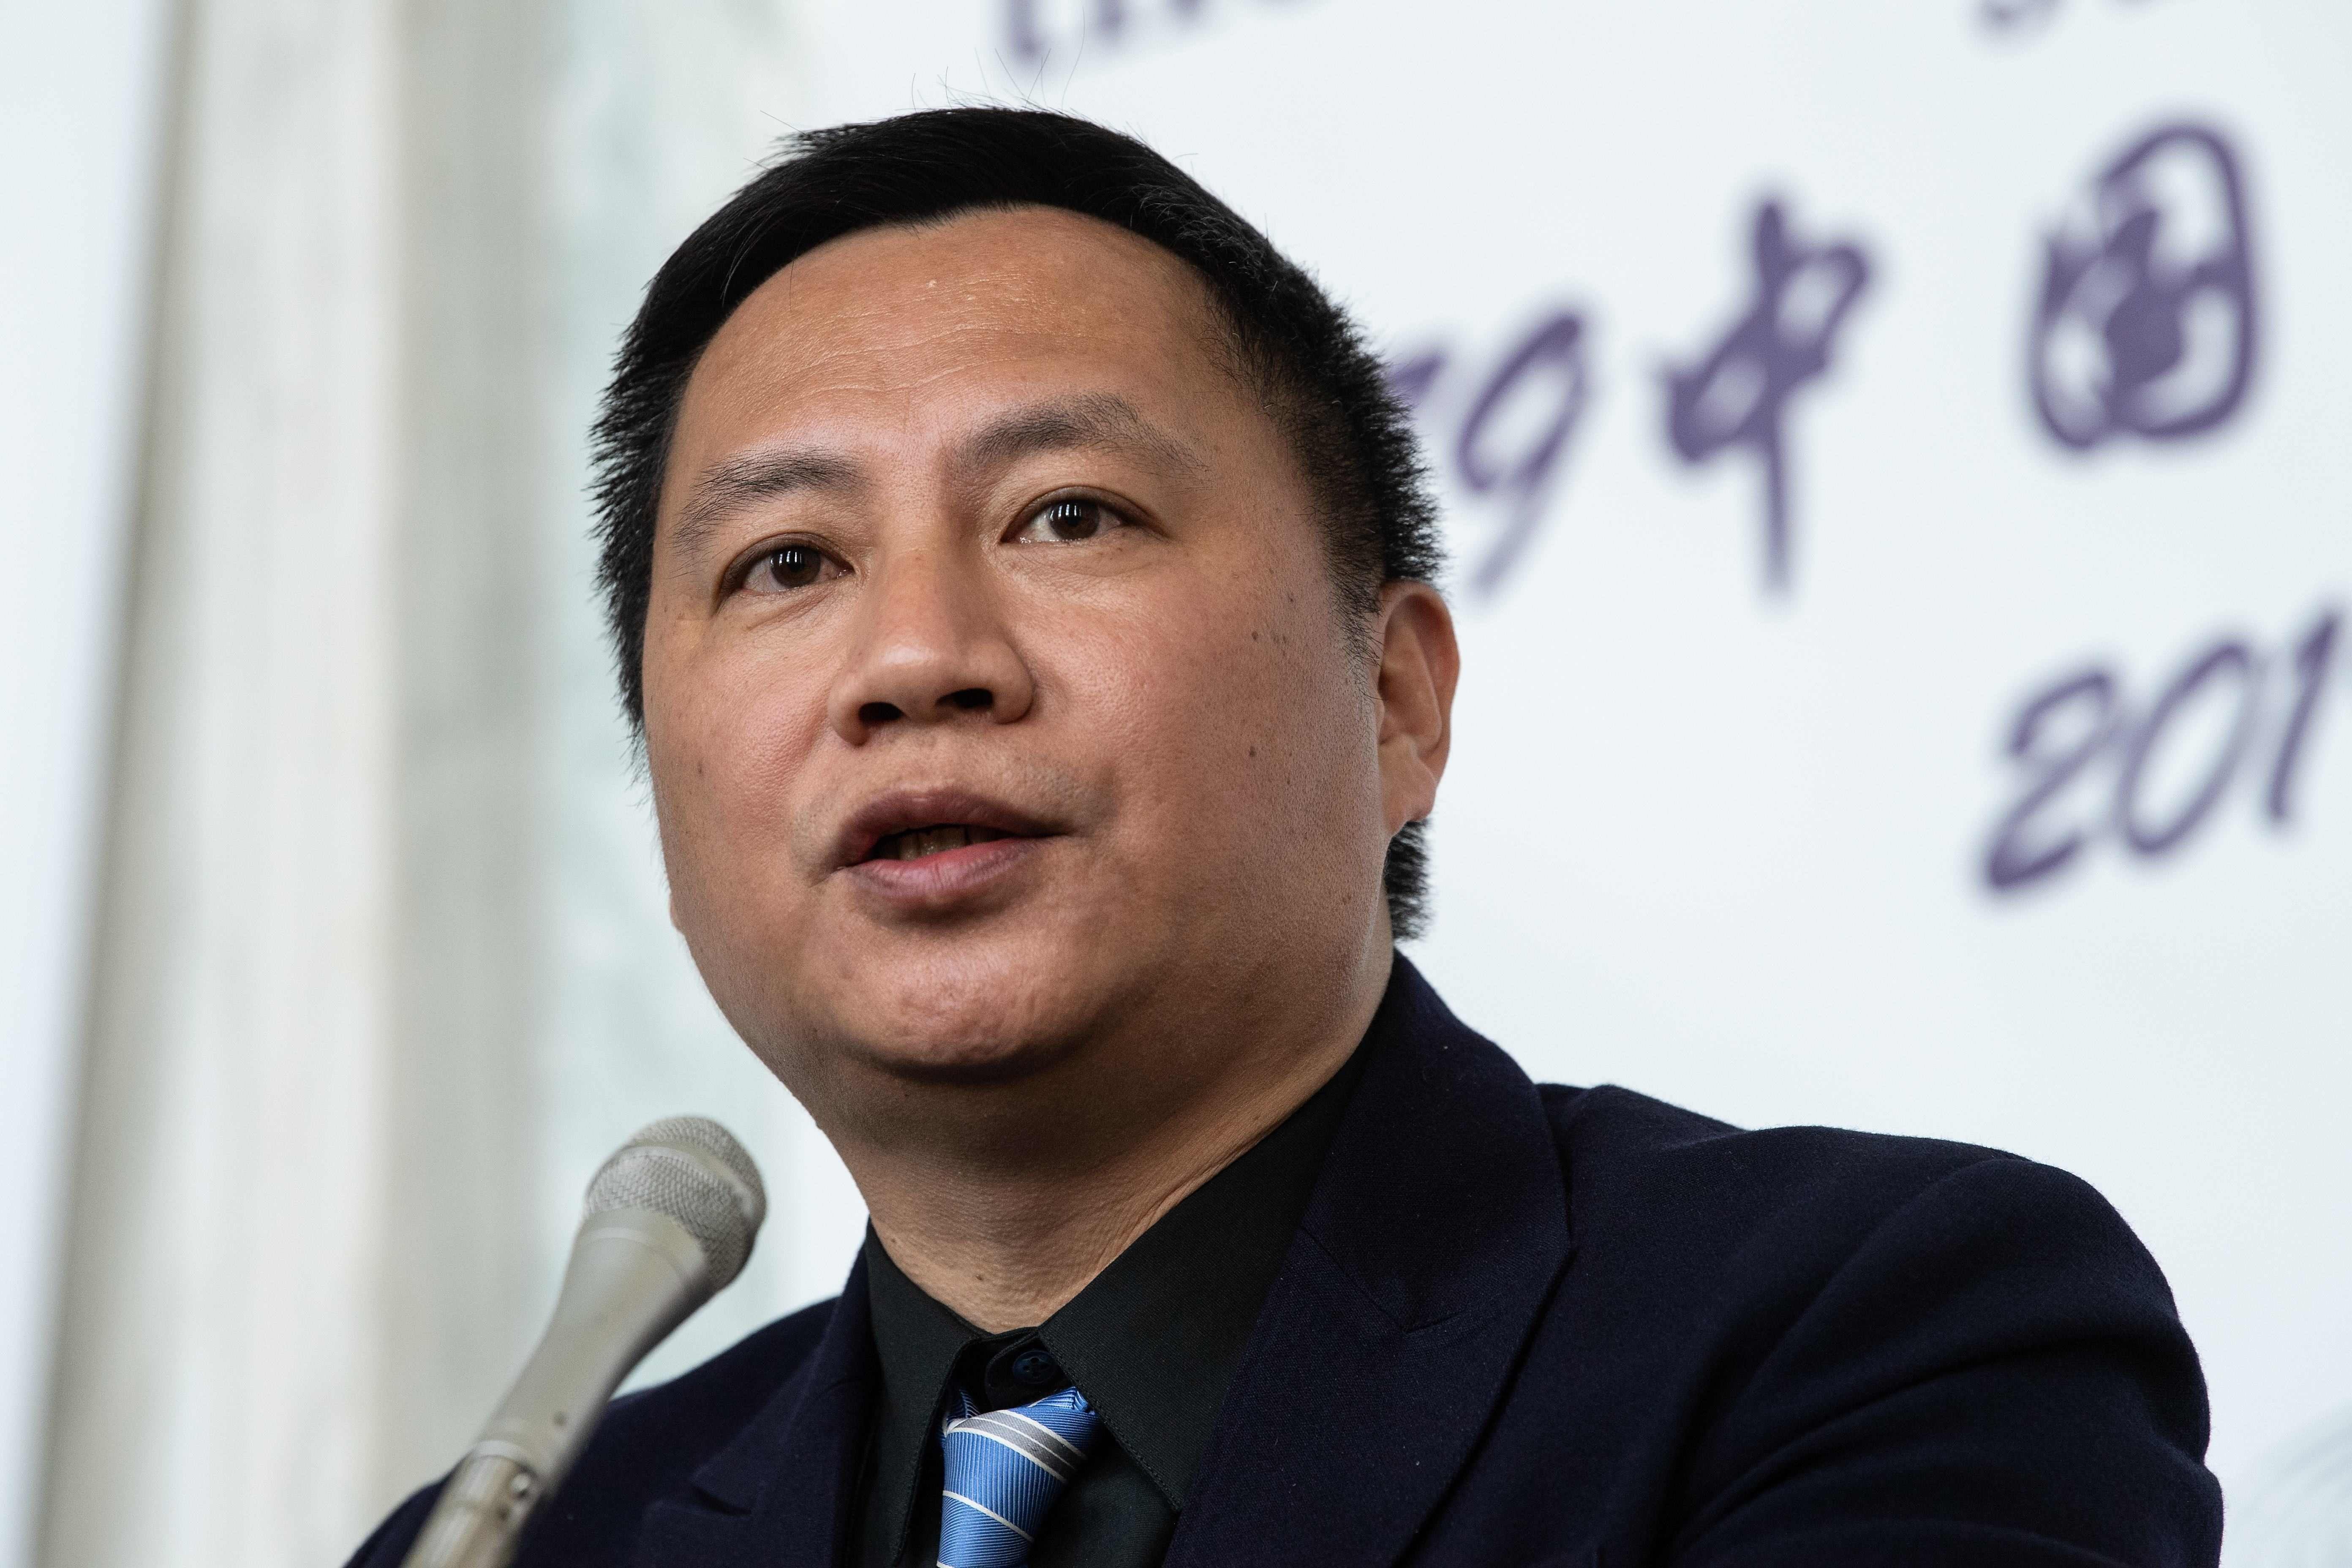 Exiled former student leader Wang Dan and more than 20 other Chinese activists are calling on the UN Human Rights Council to investigate the Tiananmen Square crackdown of 1989. Photo: AFP